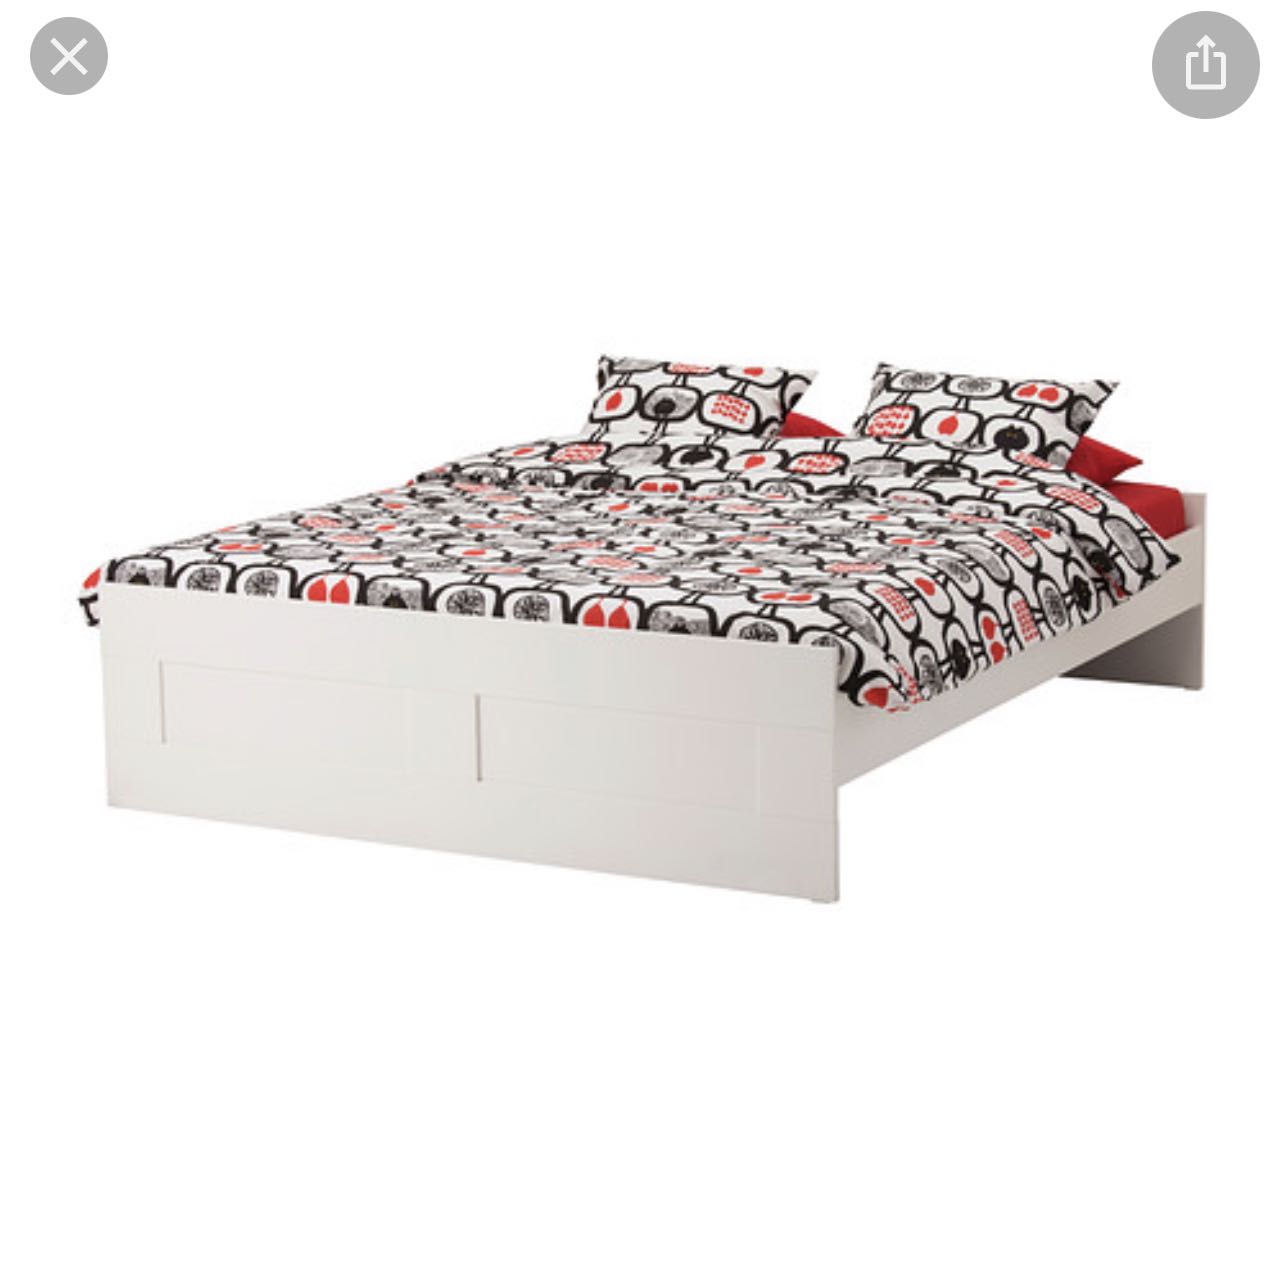 Ikea Brimnes Bed Frame Without Storage, Ikea Full Bed Frame No Headboard